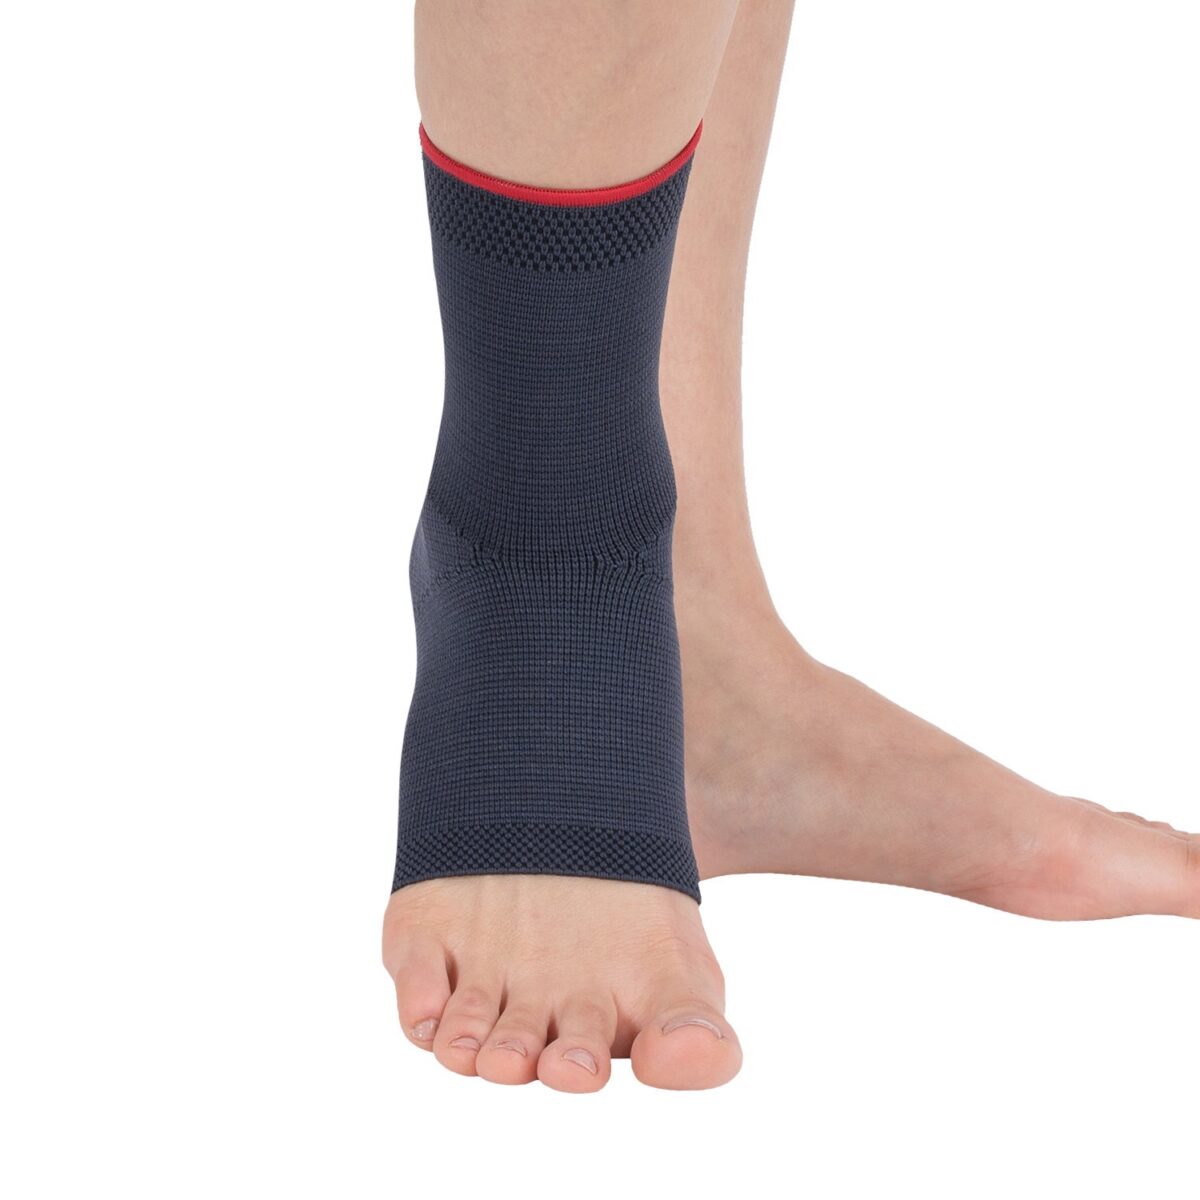 wingmed orthopedic equipments W602 woven ankle support 21 1 1